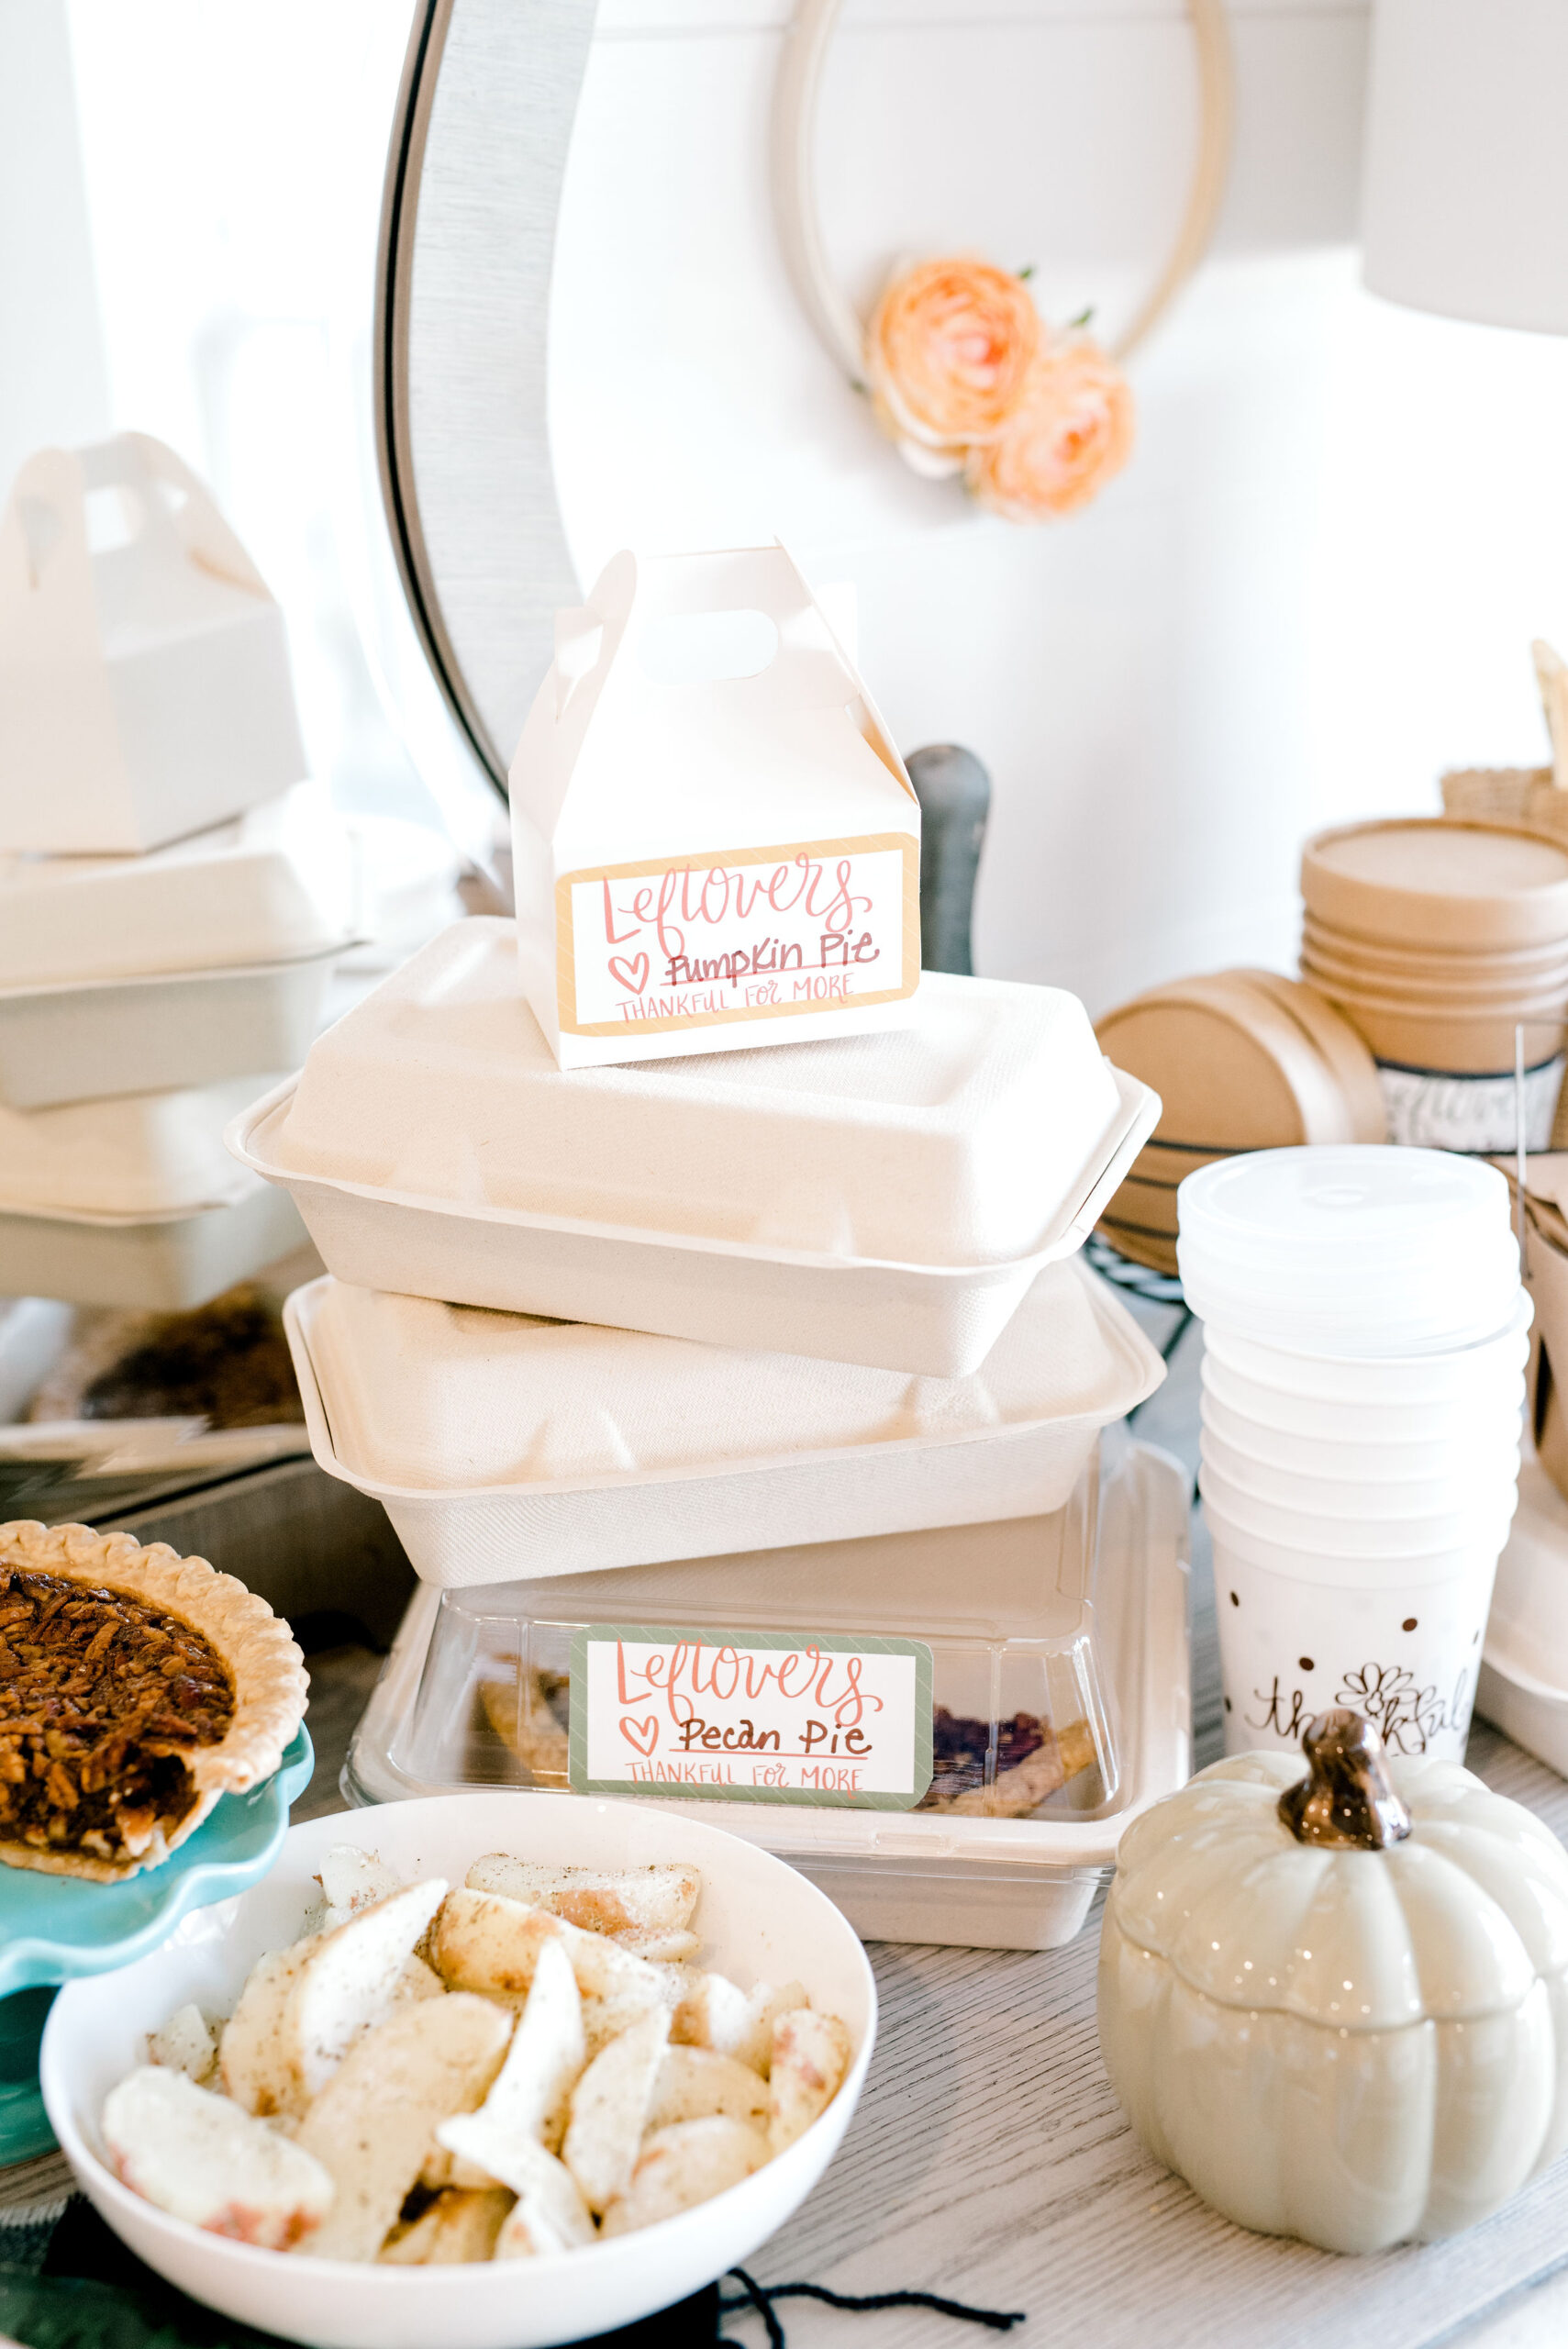 Leftovers station with to-go containers and labels.